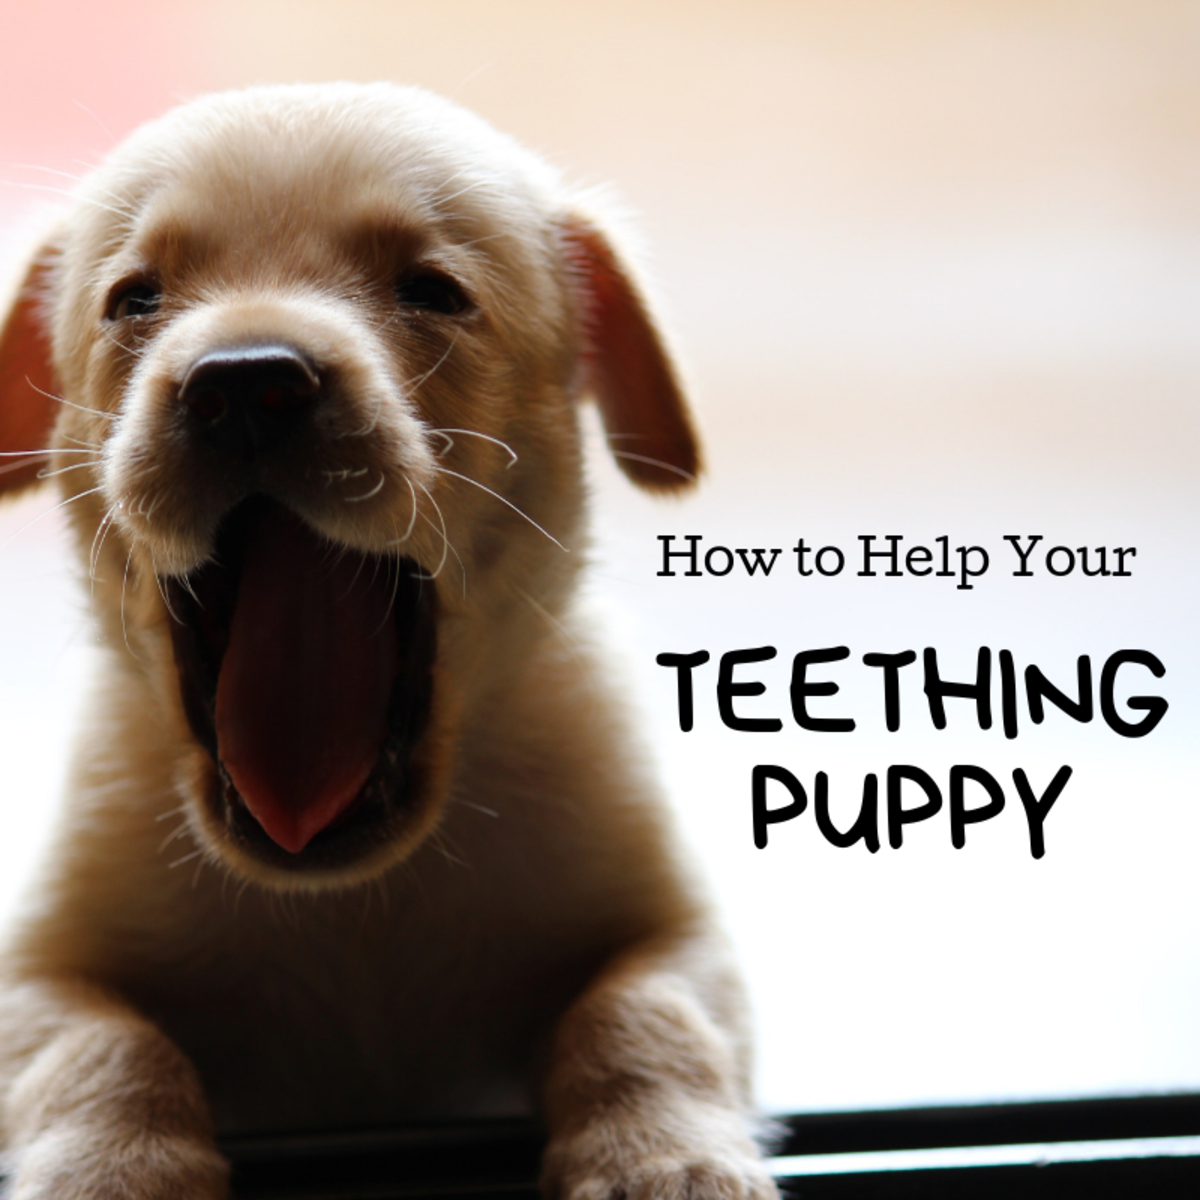 The Puppy Teething Process Remedies, Complications, and